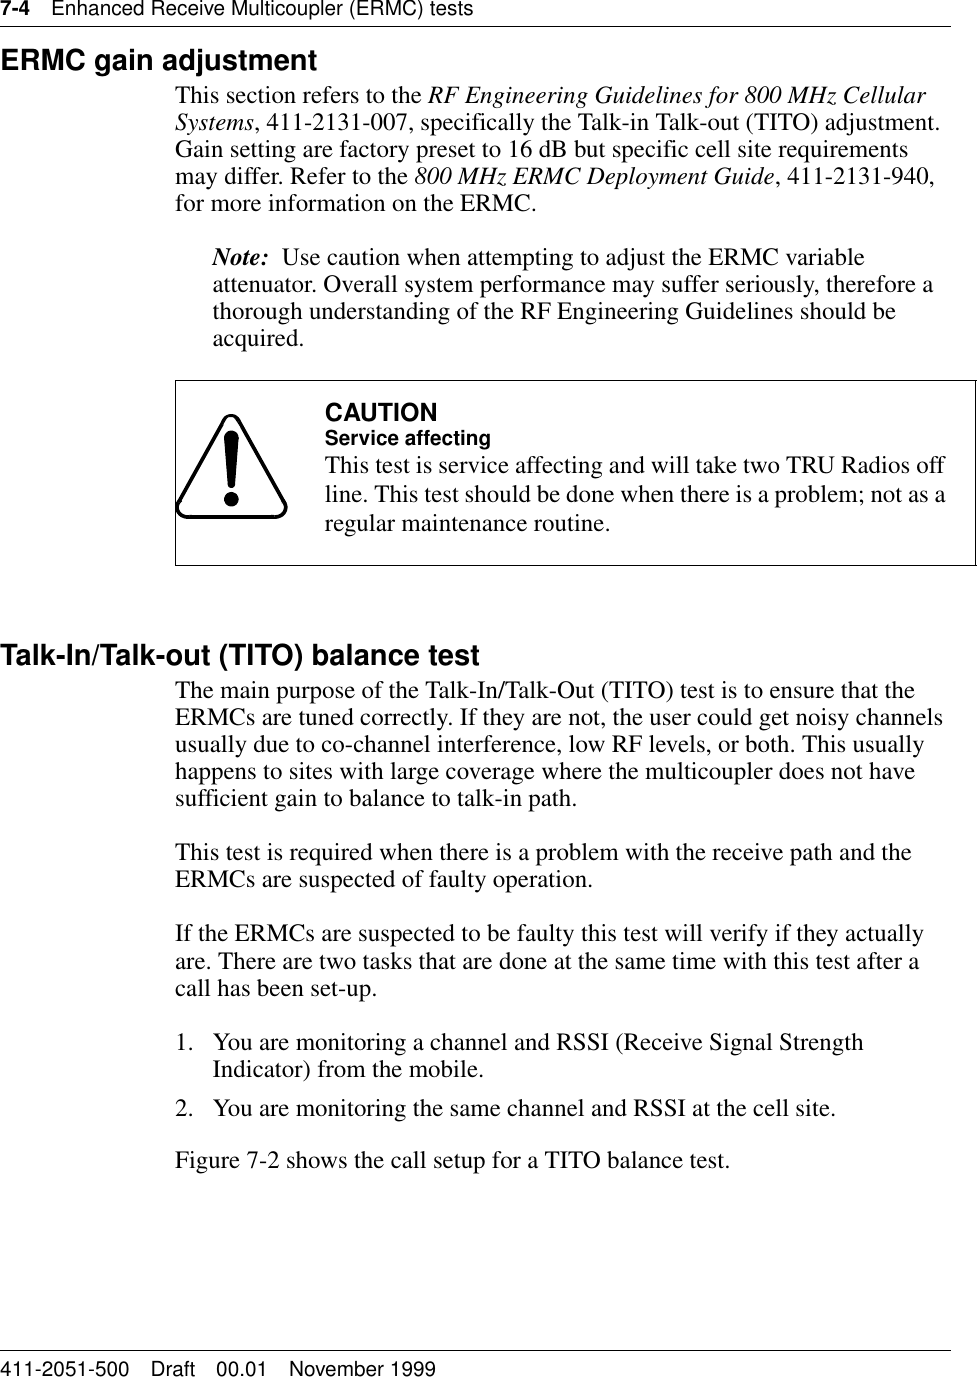 7-4 Enhanced Receive Multicoupler (ERMC) tests411-2051-500 Draft 00.01 November 1999ERMC gain adjustmentThis section refers to the RF Engineering Guidelines for 800 MHz Cellular Systems, 411-2131-007, specifically the Talk-in Talk-out (TITO) adjustment. Gain setting are factory preset to 16 dB but specific cell site requirements may differ. Refer to the 800 MHz ERMC Deployment Guide, 411-2131-940, for more information on the ERMC.Note:  Use caution when attempting to adjust the ERMC variable attenuator. Overall system performance may suffer seriously, therefore a thorough understanding of the RF Engineering Guidelines should be acquired.Talk-In/Talk-out (TITO) balance testThe main purpose of the Talk-In/Talk-Out (TITO) test is to ensure that the ERMCs are tuned correctly. If they are not, the user could get noisy channels usually due to co-channel interference, low RF levels, or both. This usually happens to sites with large coverage where the multicoupler does not have sufficient gain to balance to talk-in path.This test is required when there is a problem with the receive path and the ERMCs are suspected of faulty operation.If the ERMCs are suspected to be faulty this test will verify if they actually are. There are two tasks that are done at the same time with this test after a call has been set-up.1. You are monitoring a channel and RSSI (Receive Signal Strength Indicator) from the mobile.2. You are monitoring the same channel and RSSI at the cell site.Figure 7-2 shows the call setup for a TITO balance test.CAUTIONService affectingThis test is service affecting and will take two TRU Radios off line. This test should be done when there is a problem; not as a regular maintenance routine.